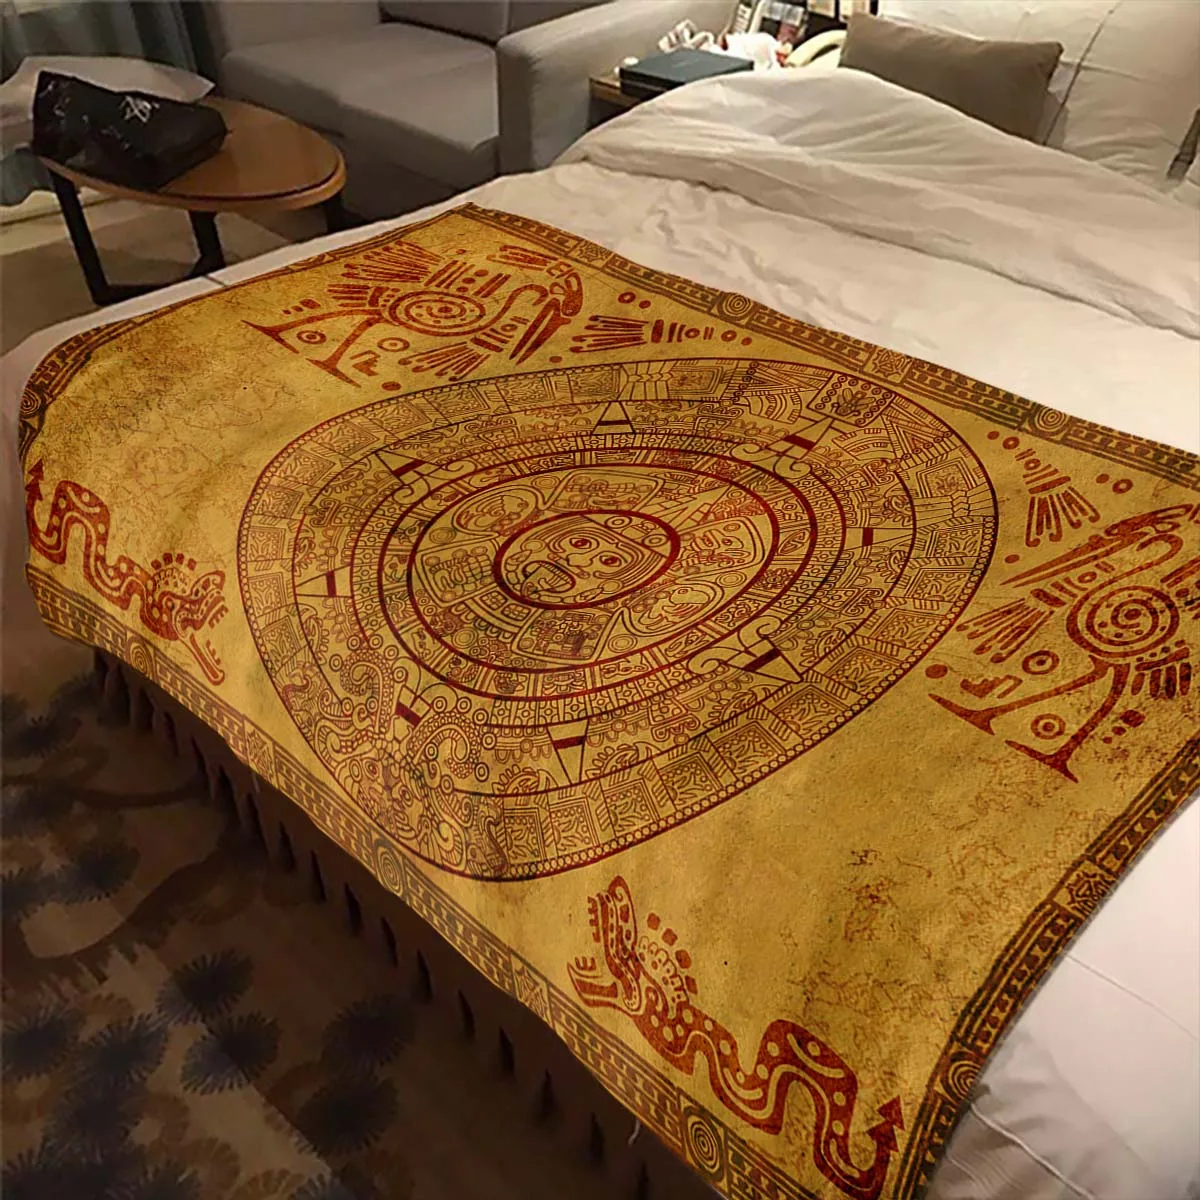 

Flannel Blanket Ancient Culture Soft Throw Blanket Hiking Picnic Bed Sofa Couch Fashion Bedspread Home Gifts Mayan Totem Printed